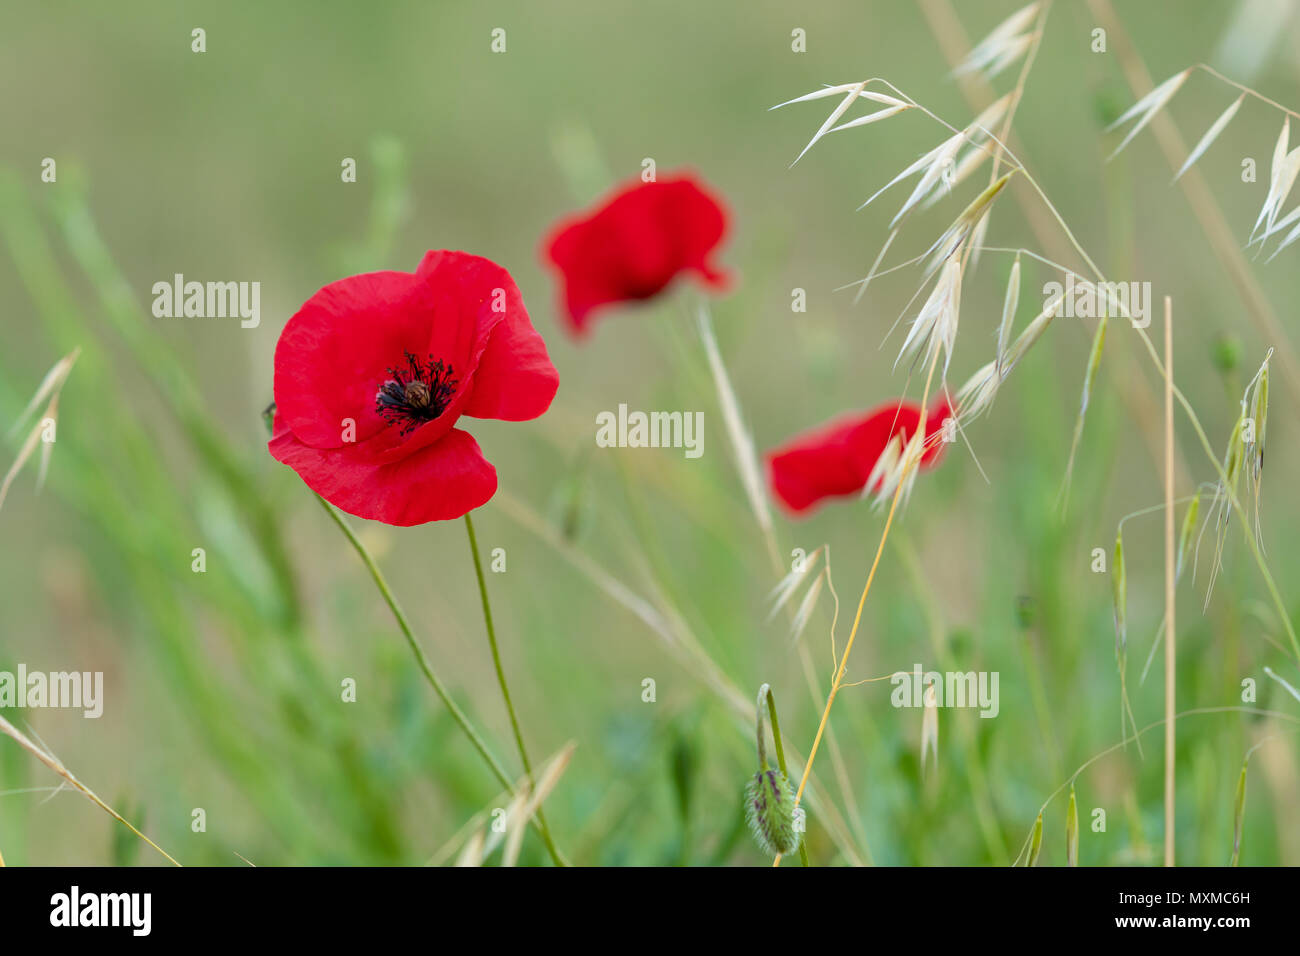 Beautiful red poppy flower with green grass in nature. Stock Photo